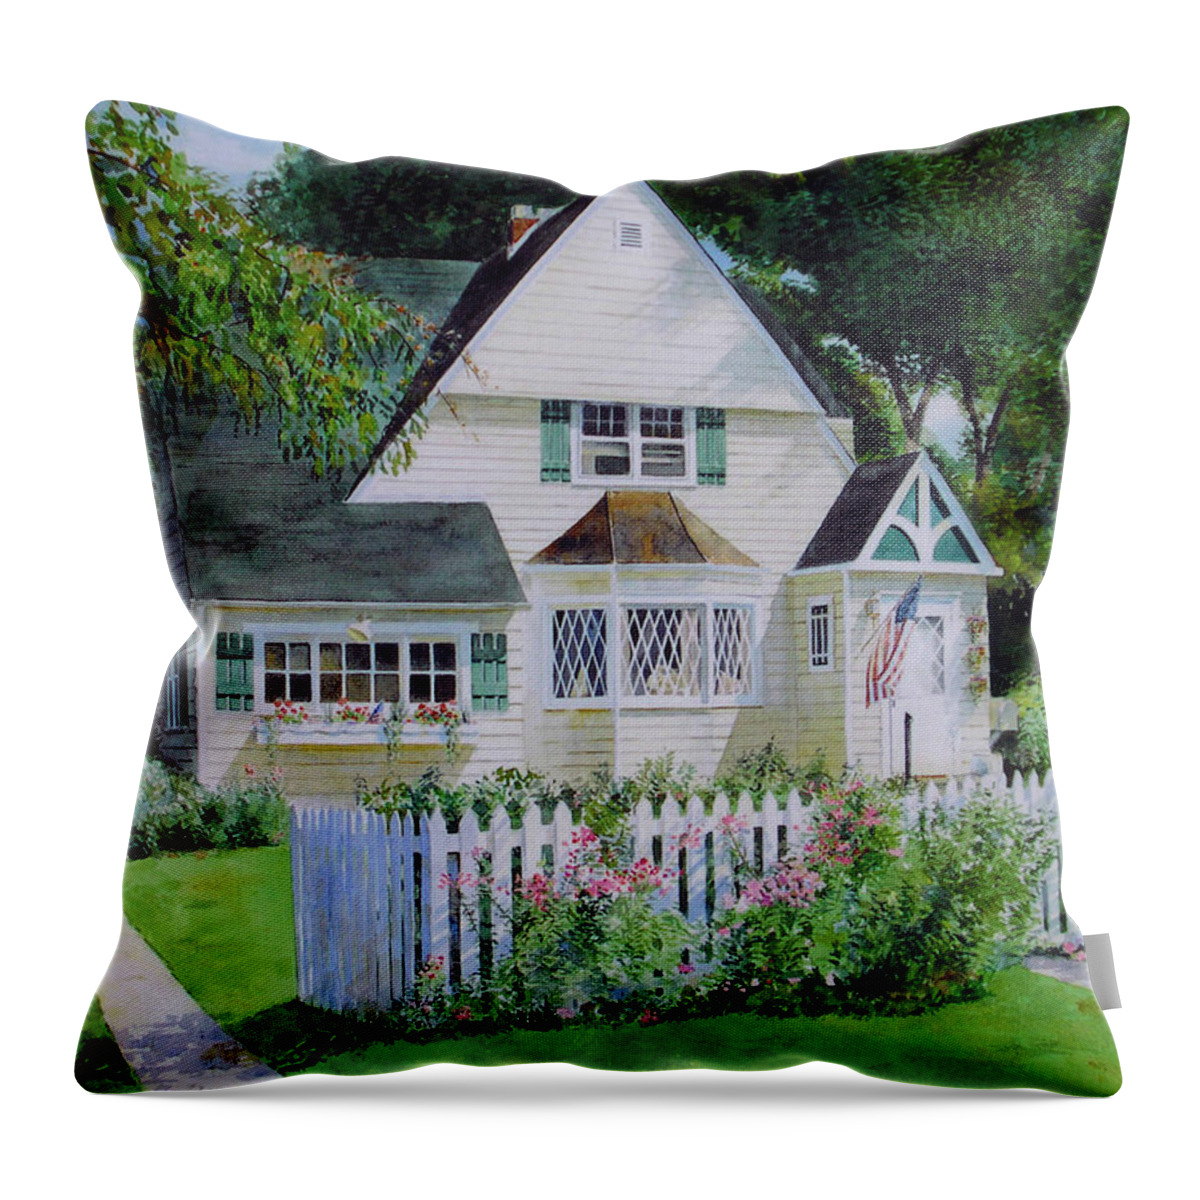  Throw Pillow featuring the painting Lammermann House by Tyler Ryder